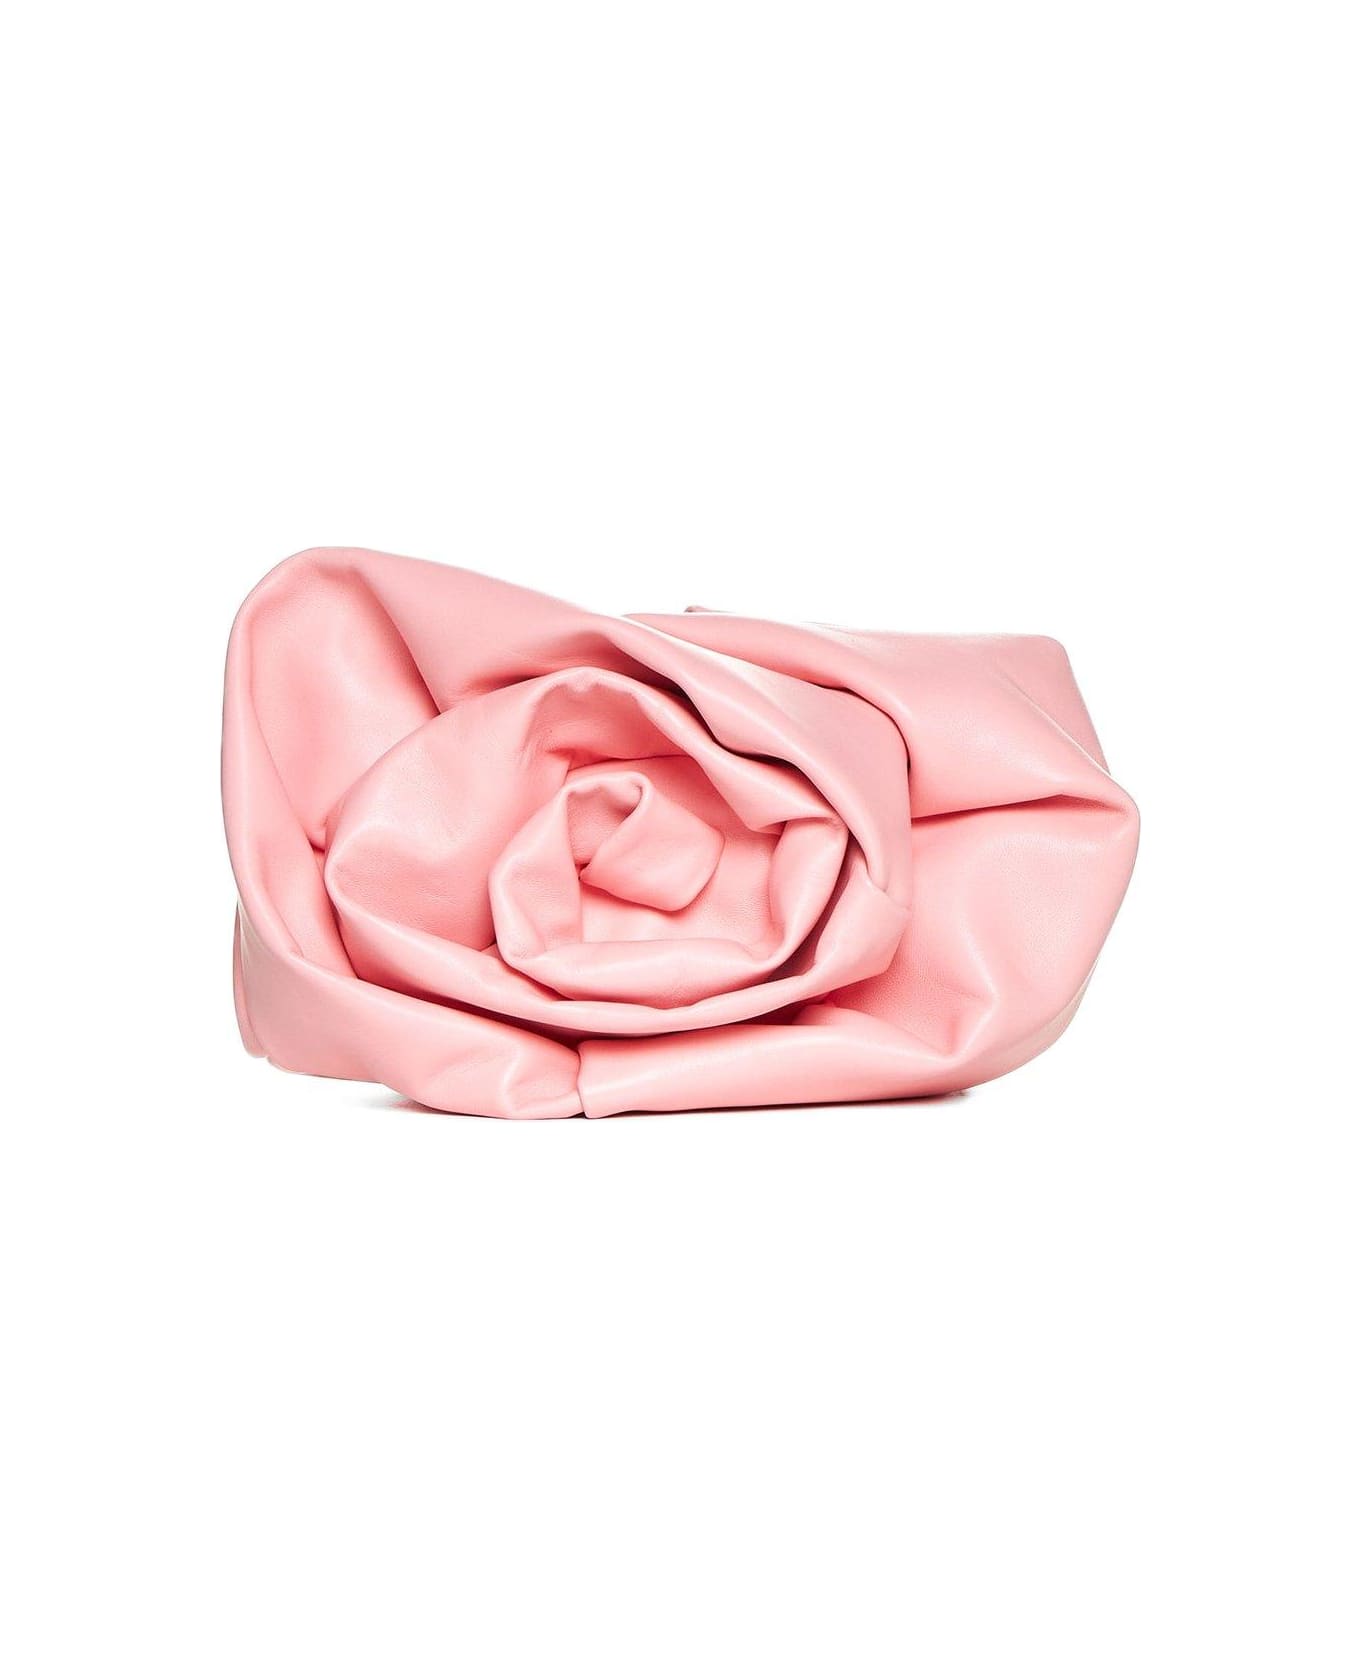 Burberry 3d Rose Ruched Clutch Bag - Candy トートバッグ